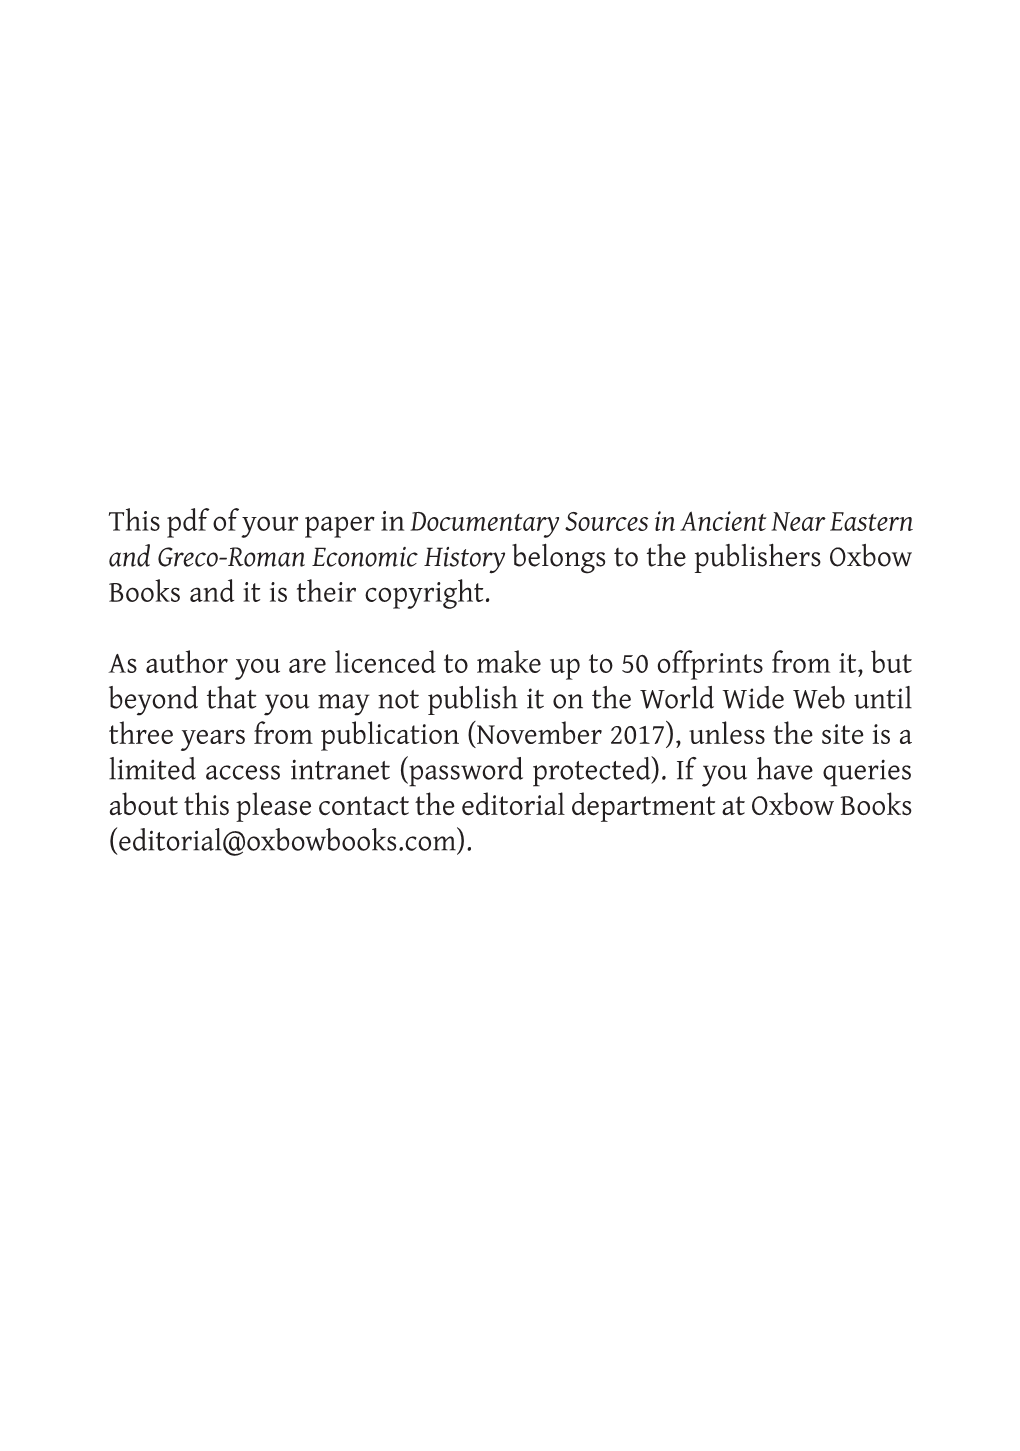 This Pdf of Your Paper in Documentary Sources in Ancient Near Eastern and Greco-Roman Economic History Belongs to the Publishers Oxbow Books and It Is Their Copyright